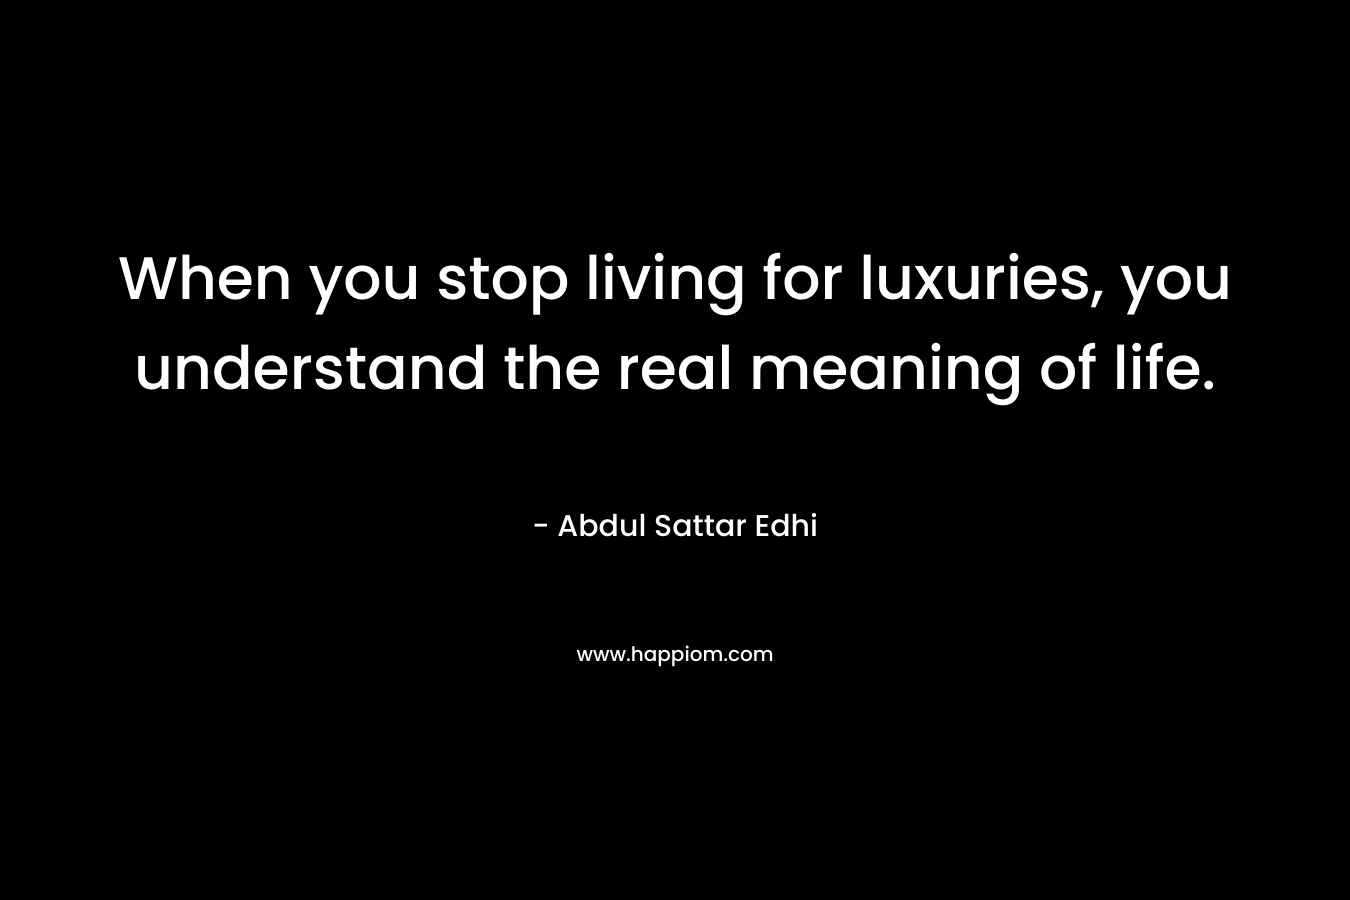 When you stop living for luxuries, you understand the real meaning of life.